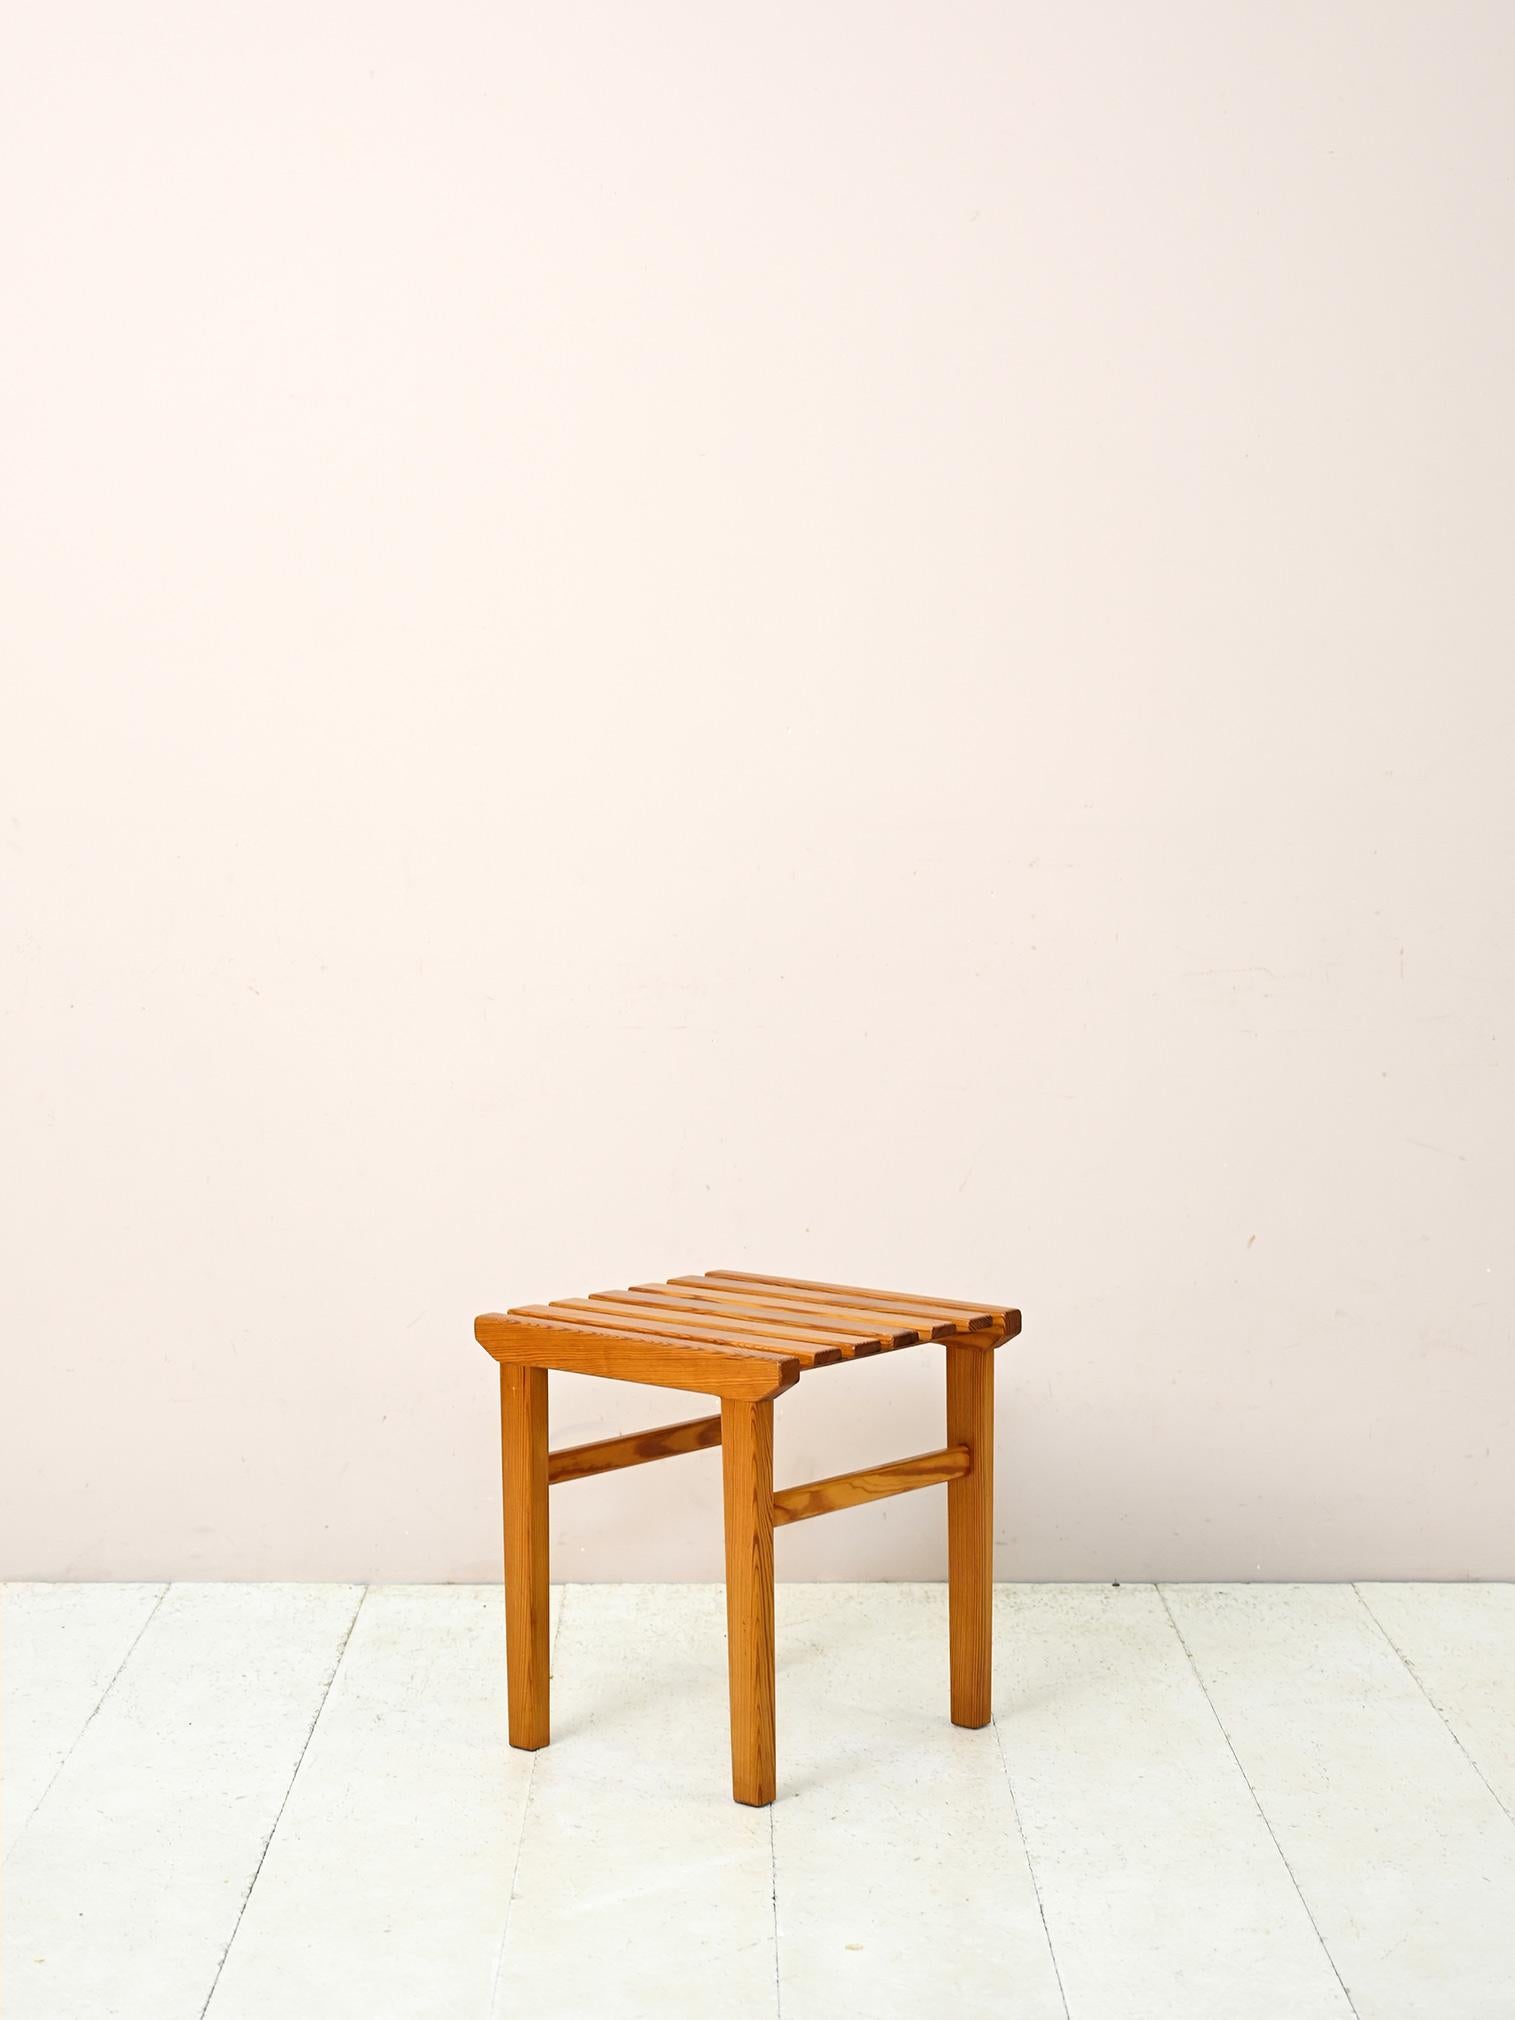 Original Scandinavian stool made of pine wood.

A simple and versatile piece of furniture with a modern flavor. It can be used as a seat or as a plant riser. For the perfect Scandinavian look try adding it to a table with seating of different